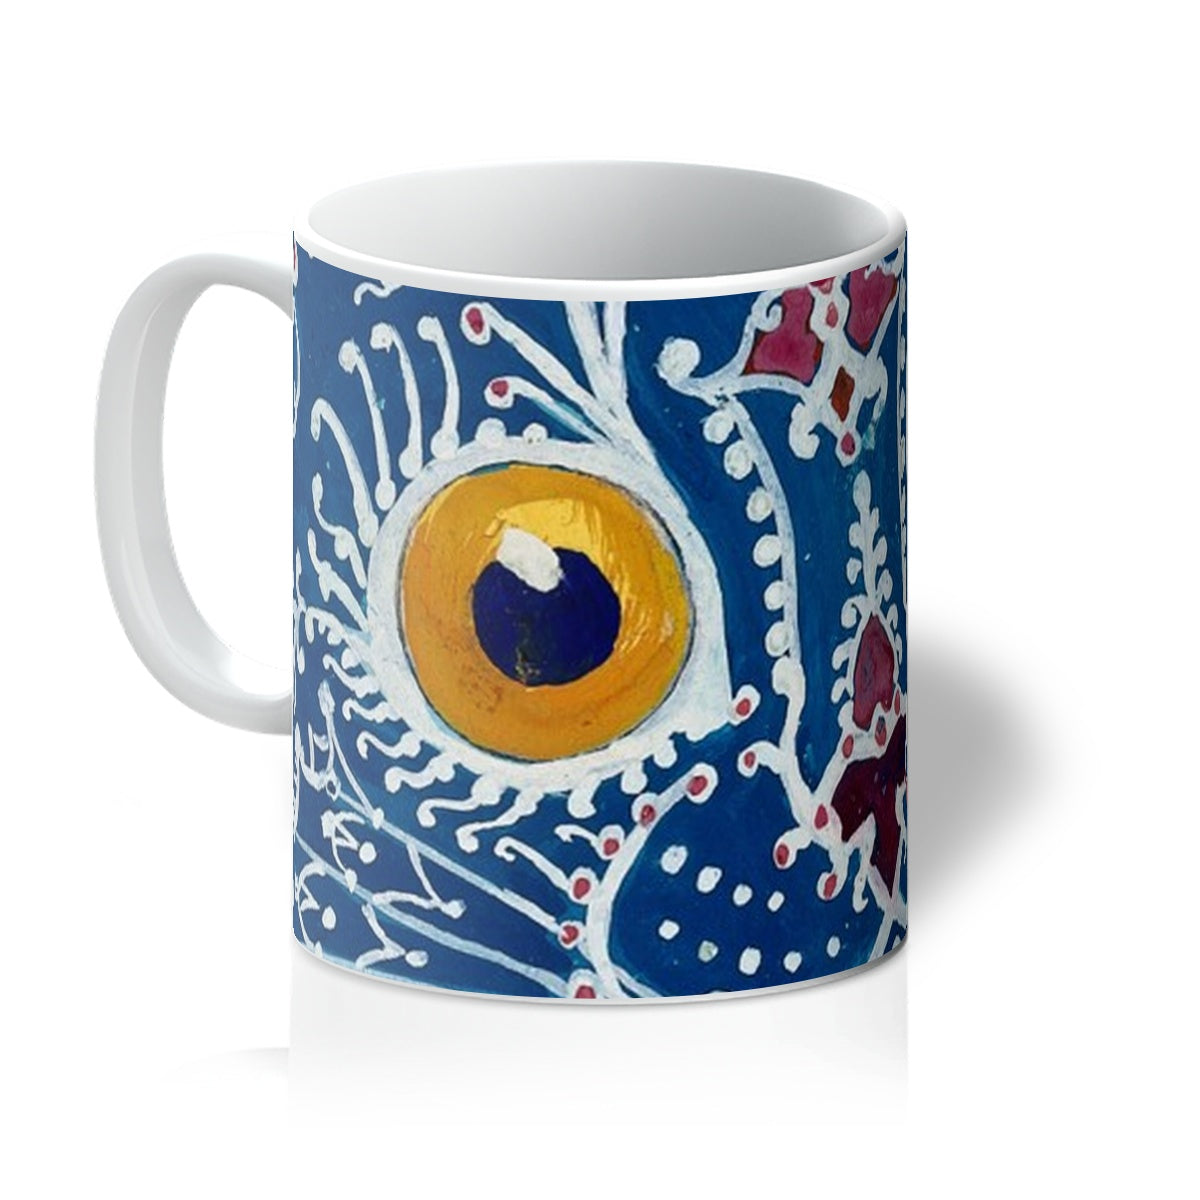 A Cat in The Gothic Style by Louis Wain Mug